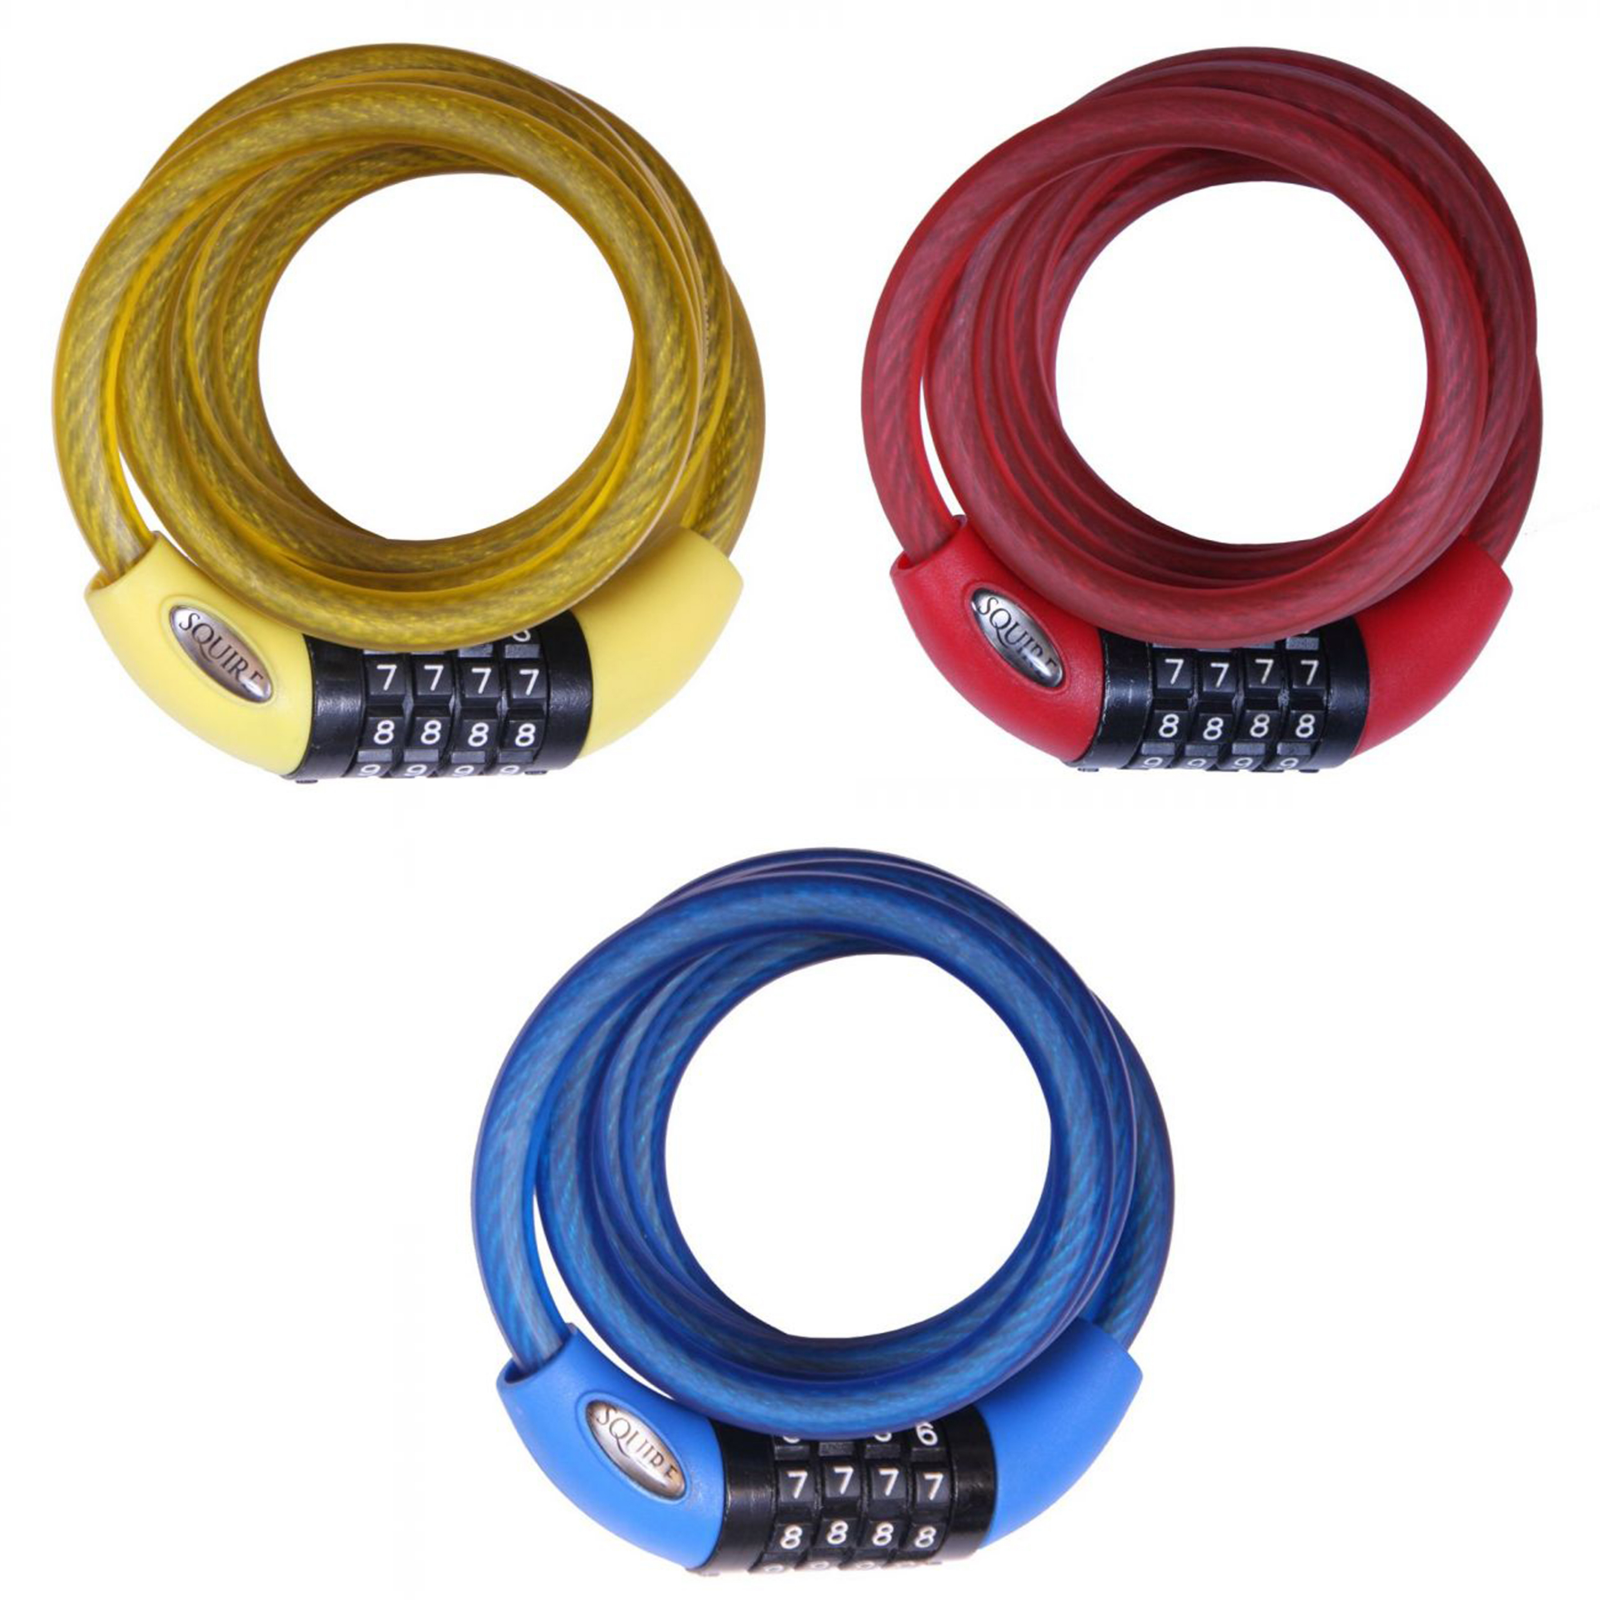 Squire 216 Combination Cable Lock - 10mm x 1800mm - Red / Yellow / Blue - Sportandleisure.com (6968017748122)